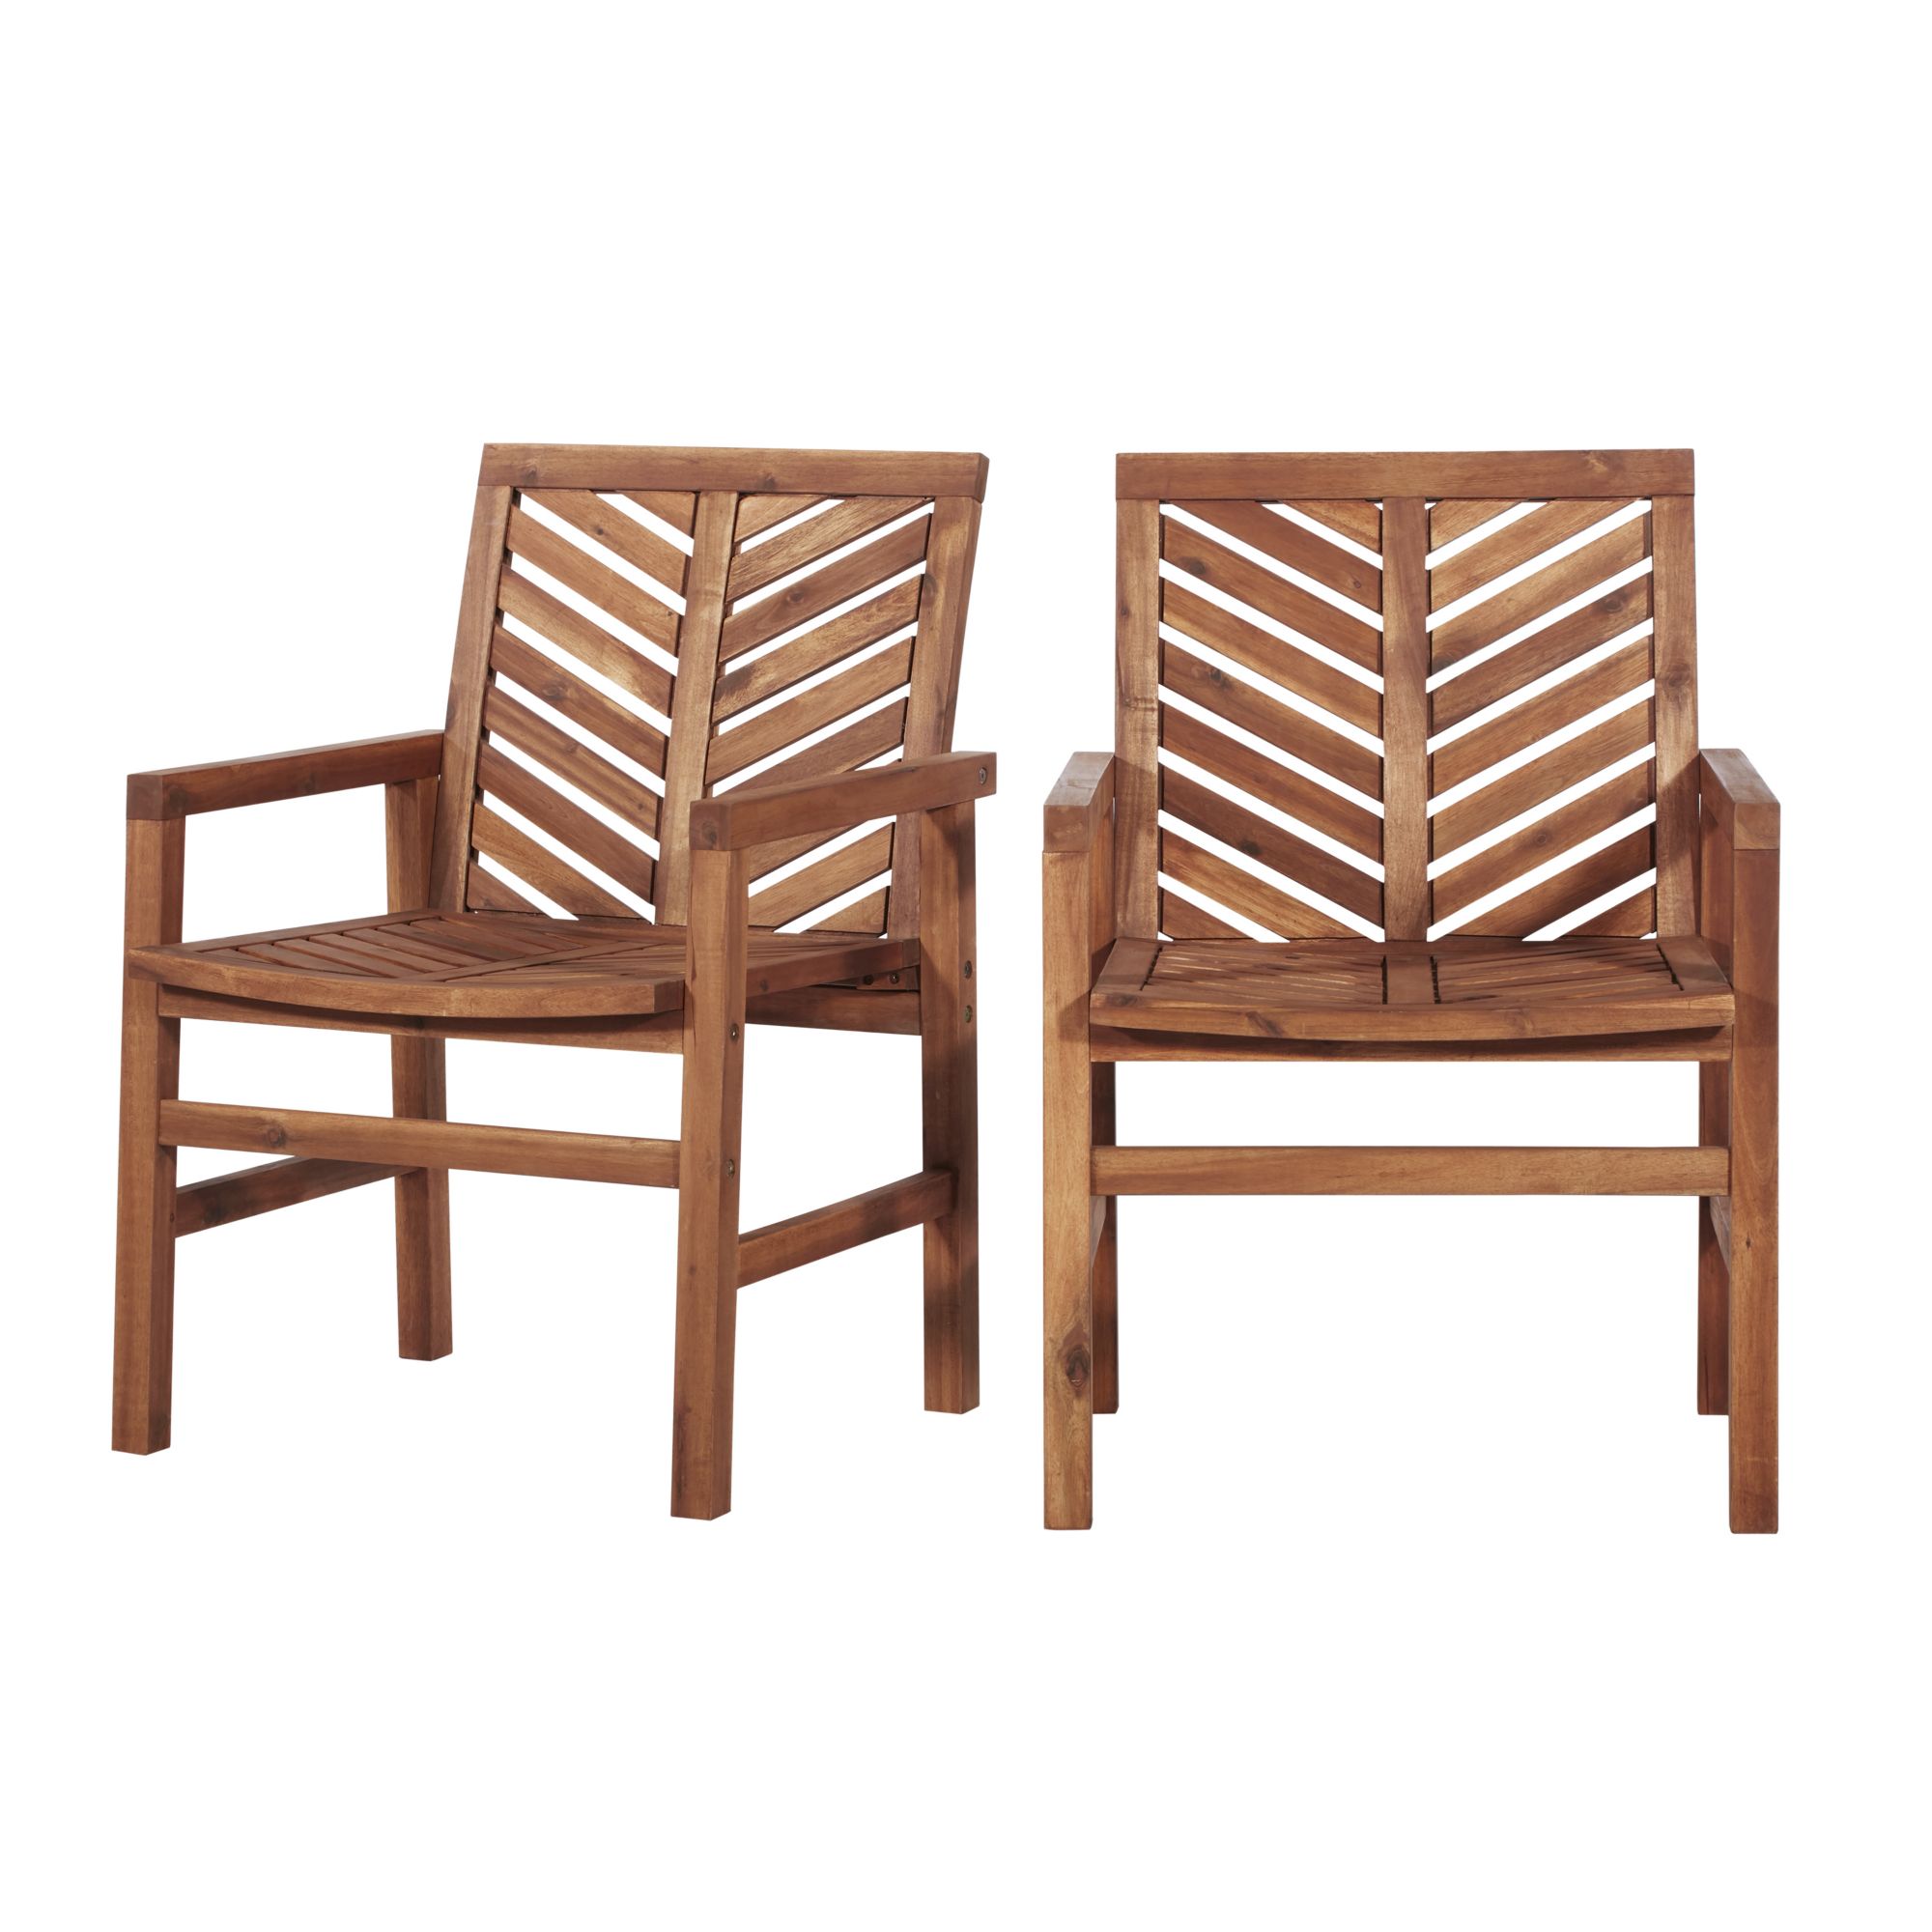 W. Trends Outdoor Finn Acacia Wood Dining Chairs - Brown